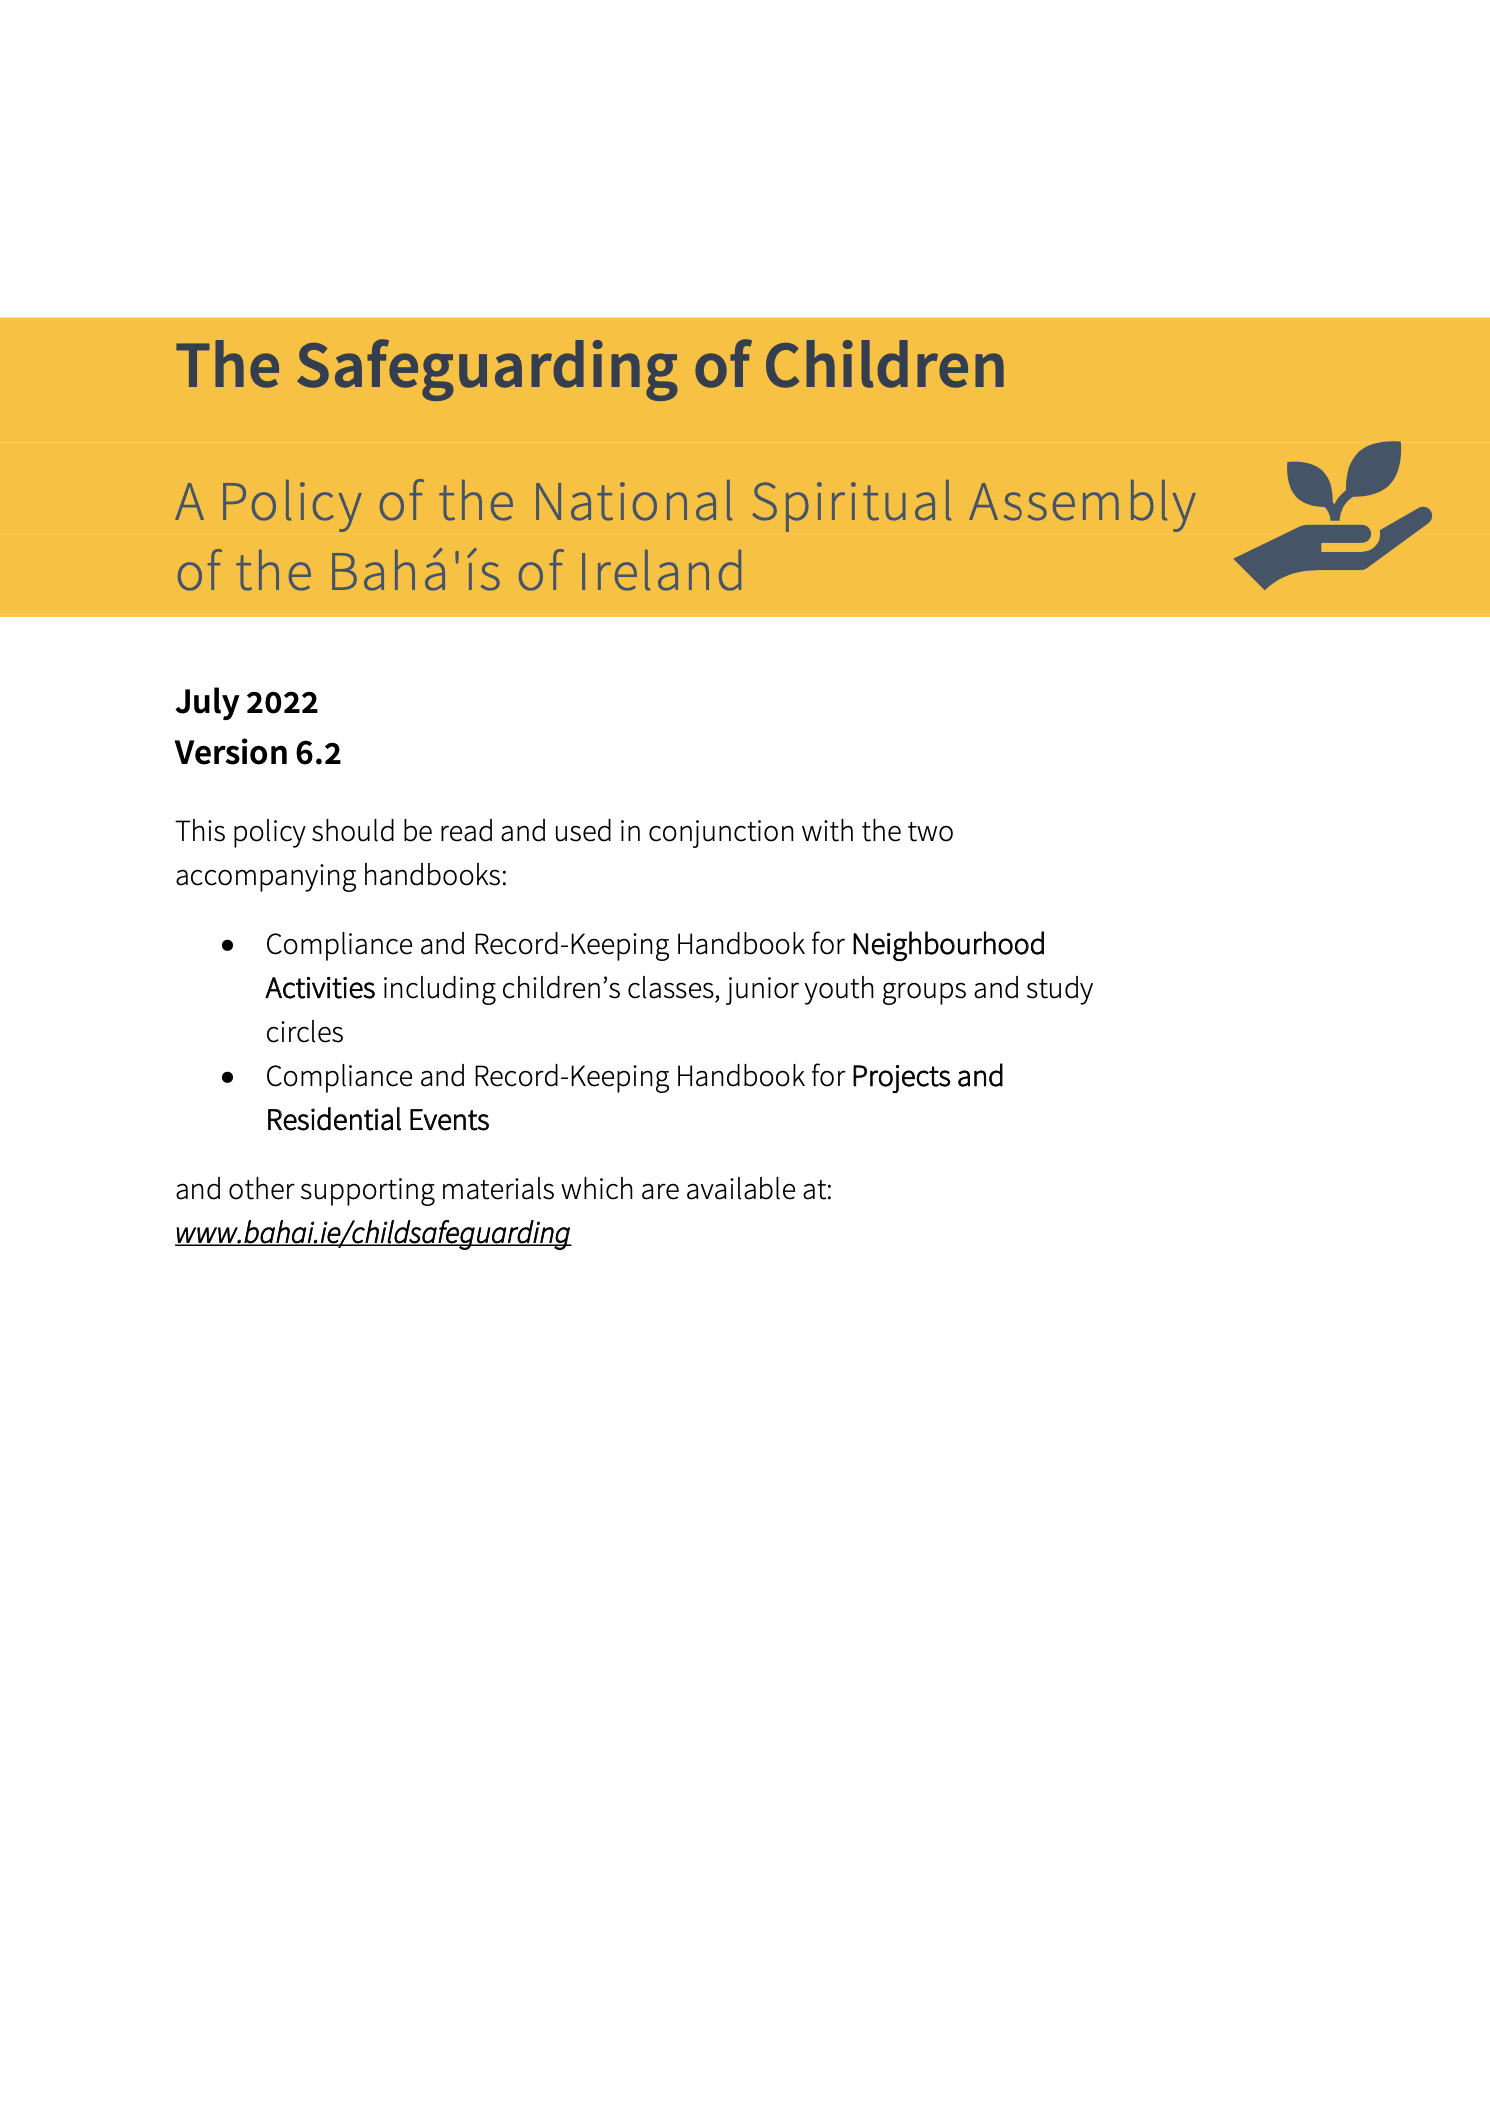 Policy for the Safeguarding of Children Version 6.2 2022